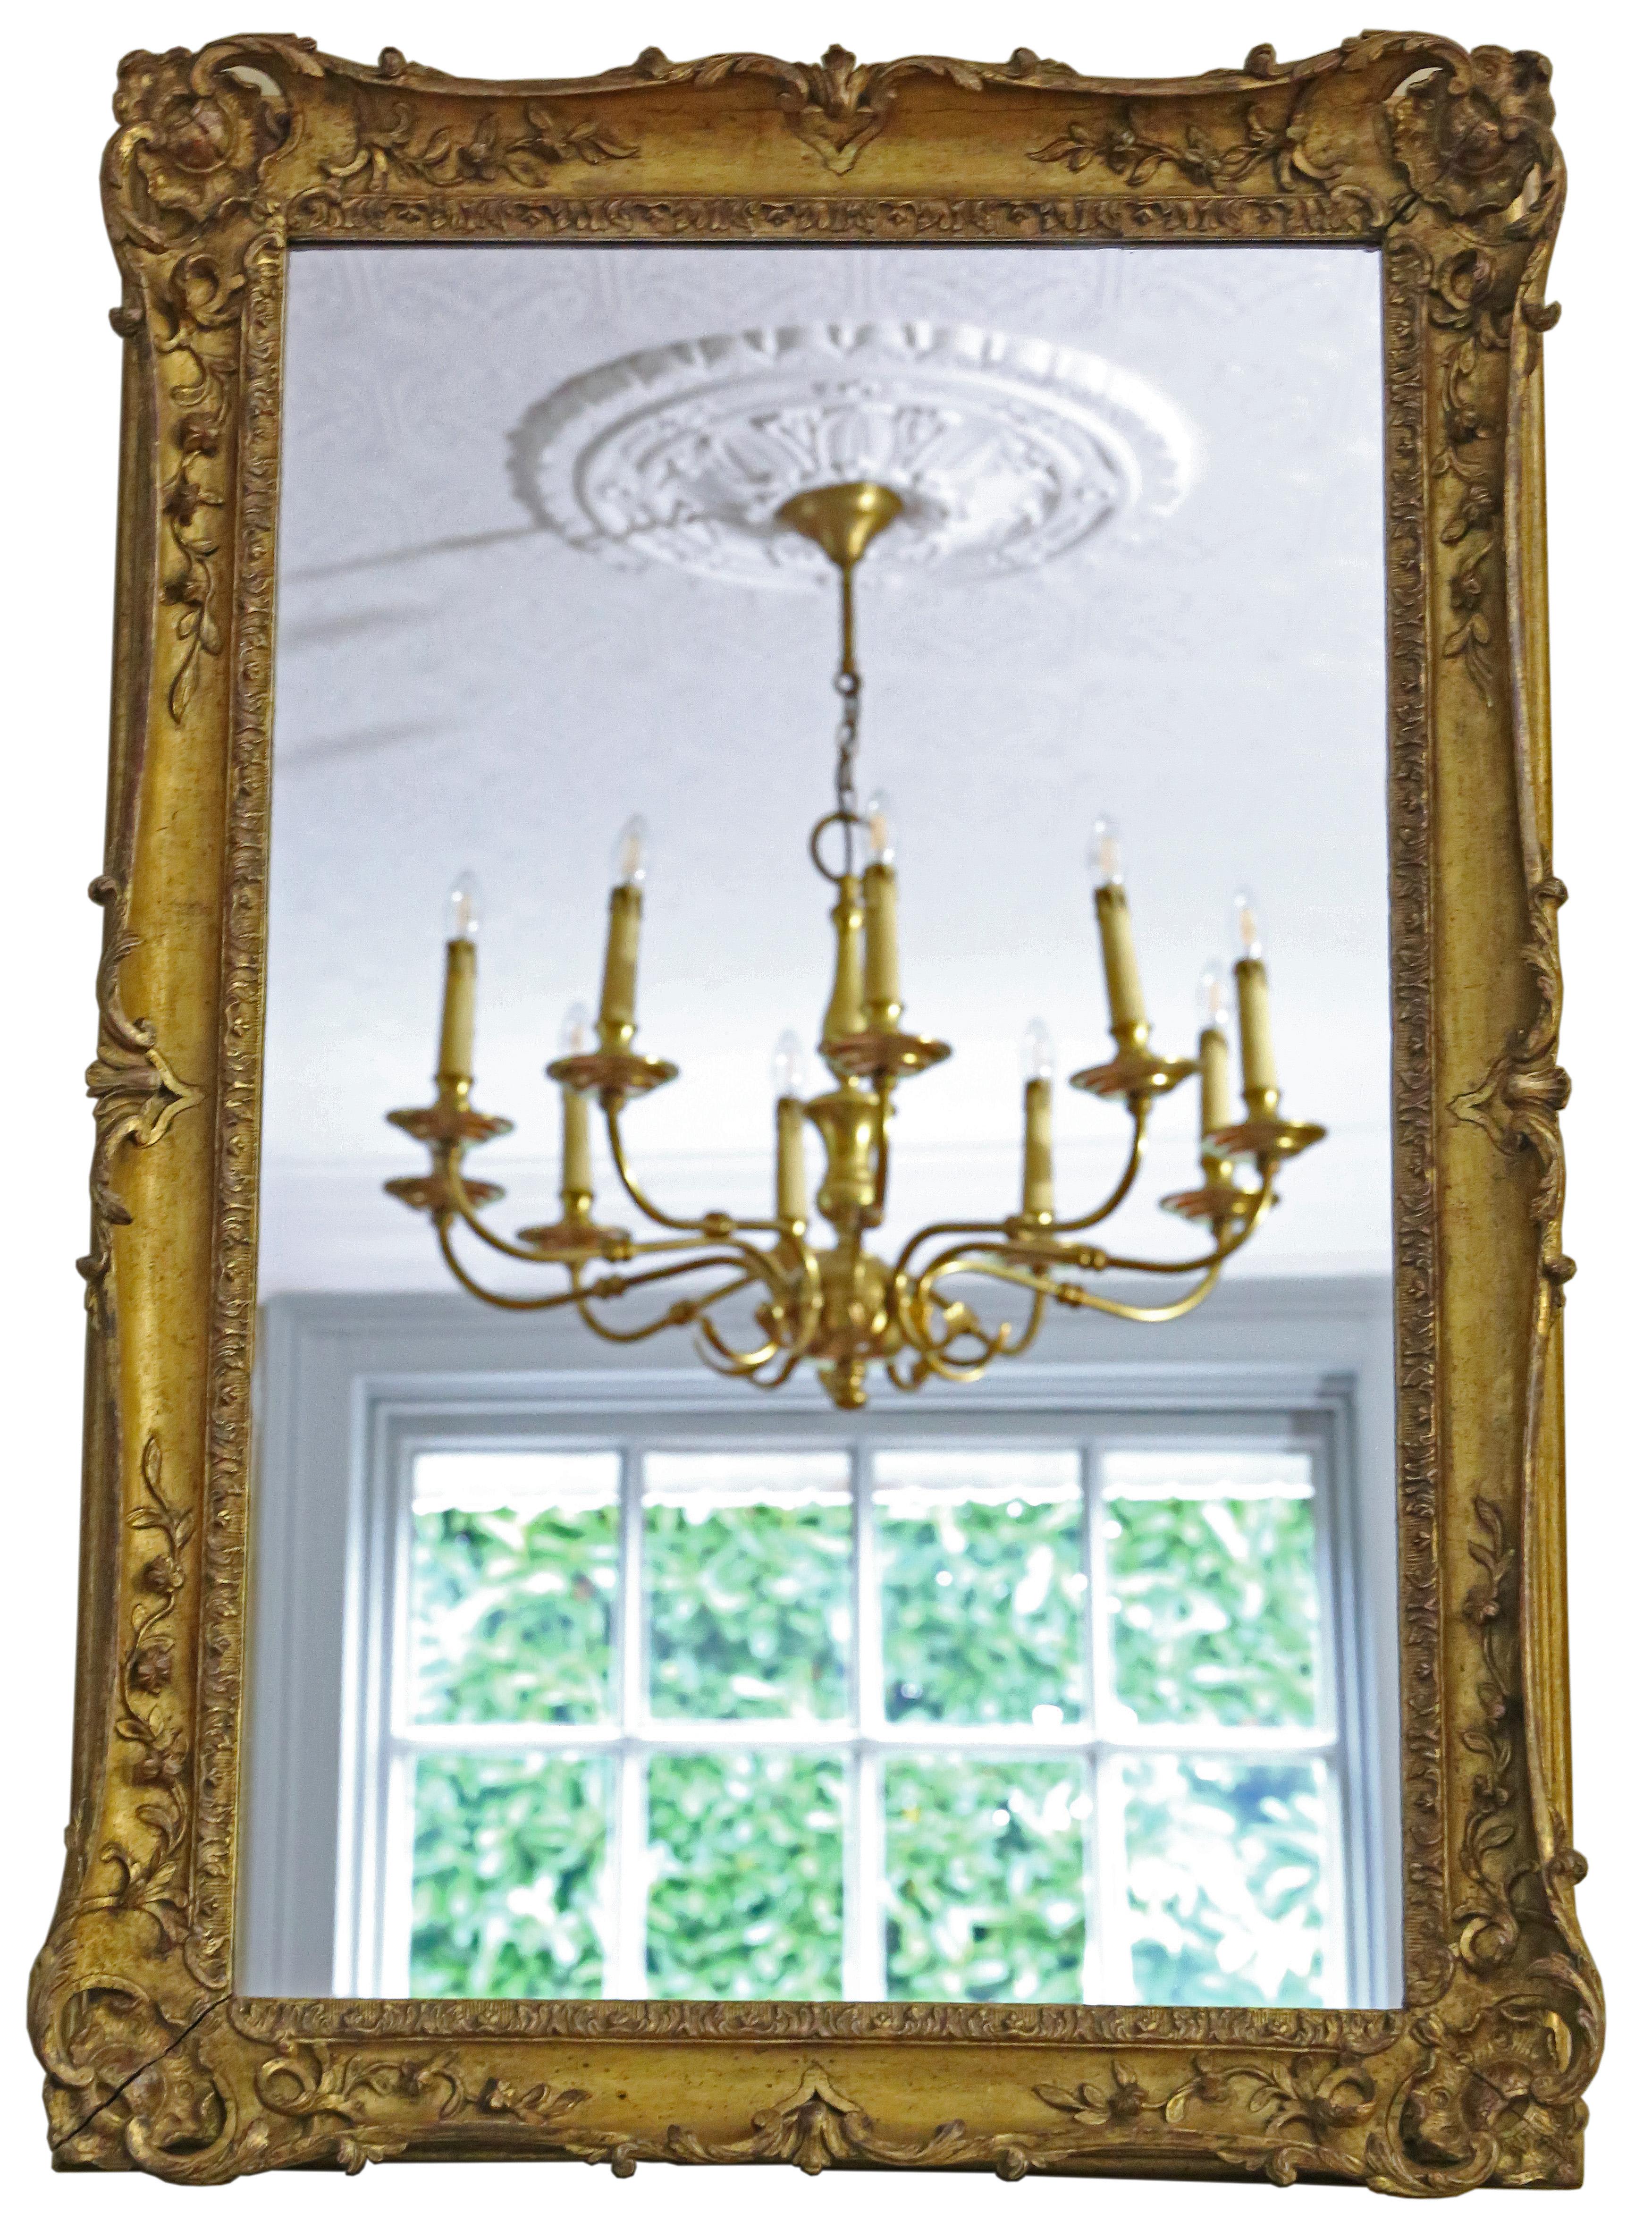 Antique large quality oak giltwood overmantle wall mirror 19th Century. Lovely charm and elegance.

This is a lovely, rare mirror. A bit different and quite special.

An impressive find, that would look amazing in the right location. No loose joints